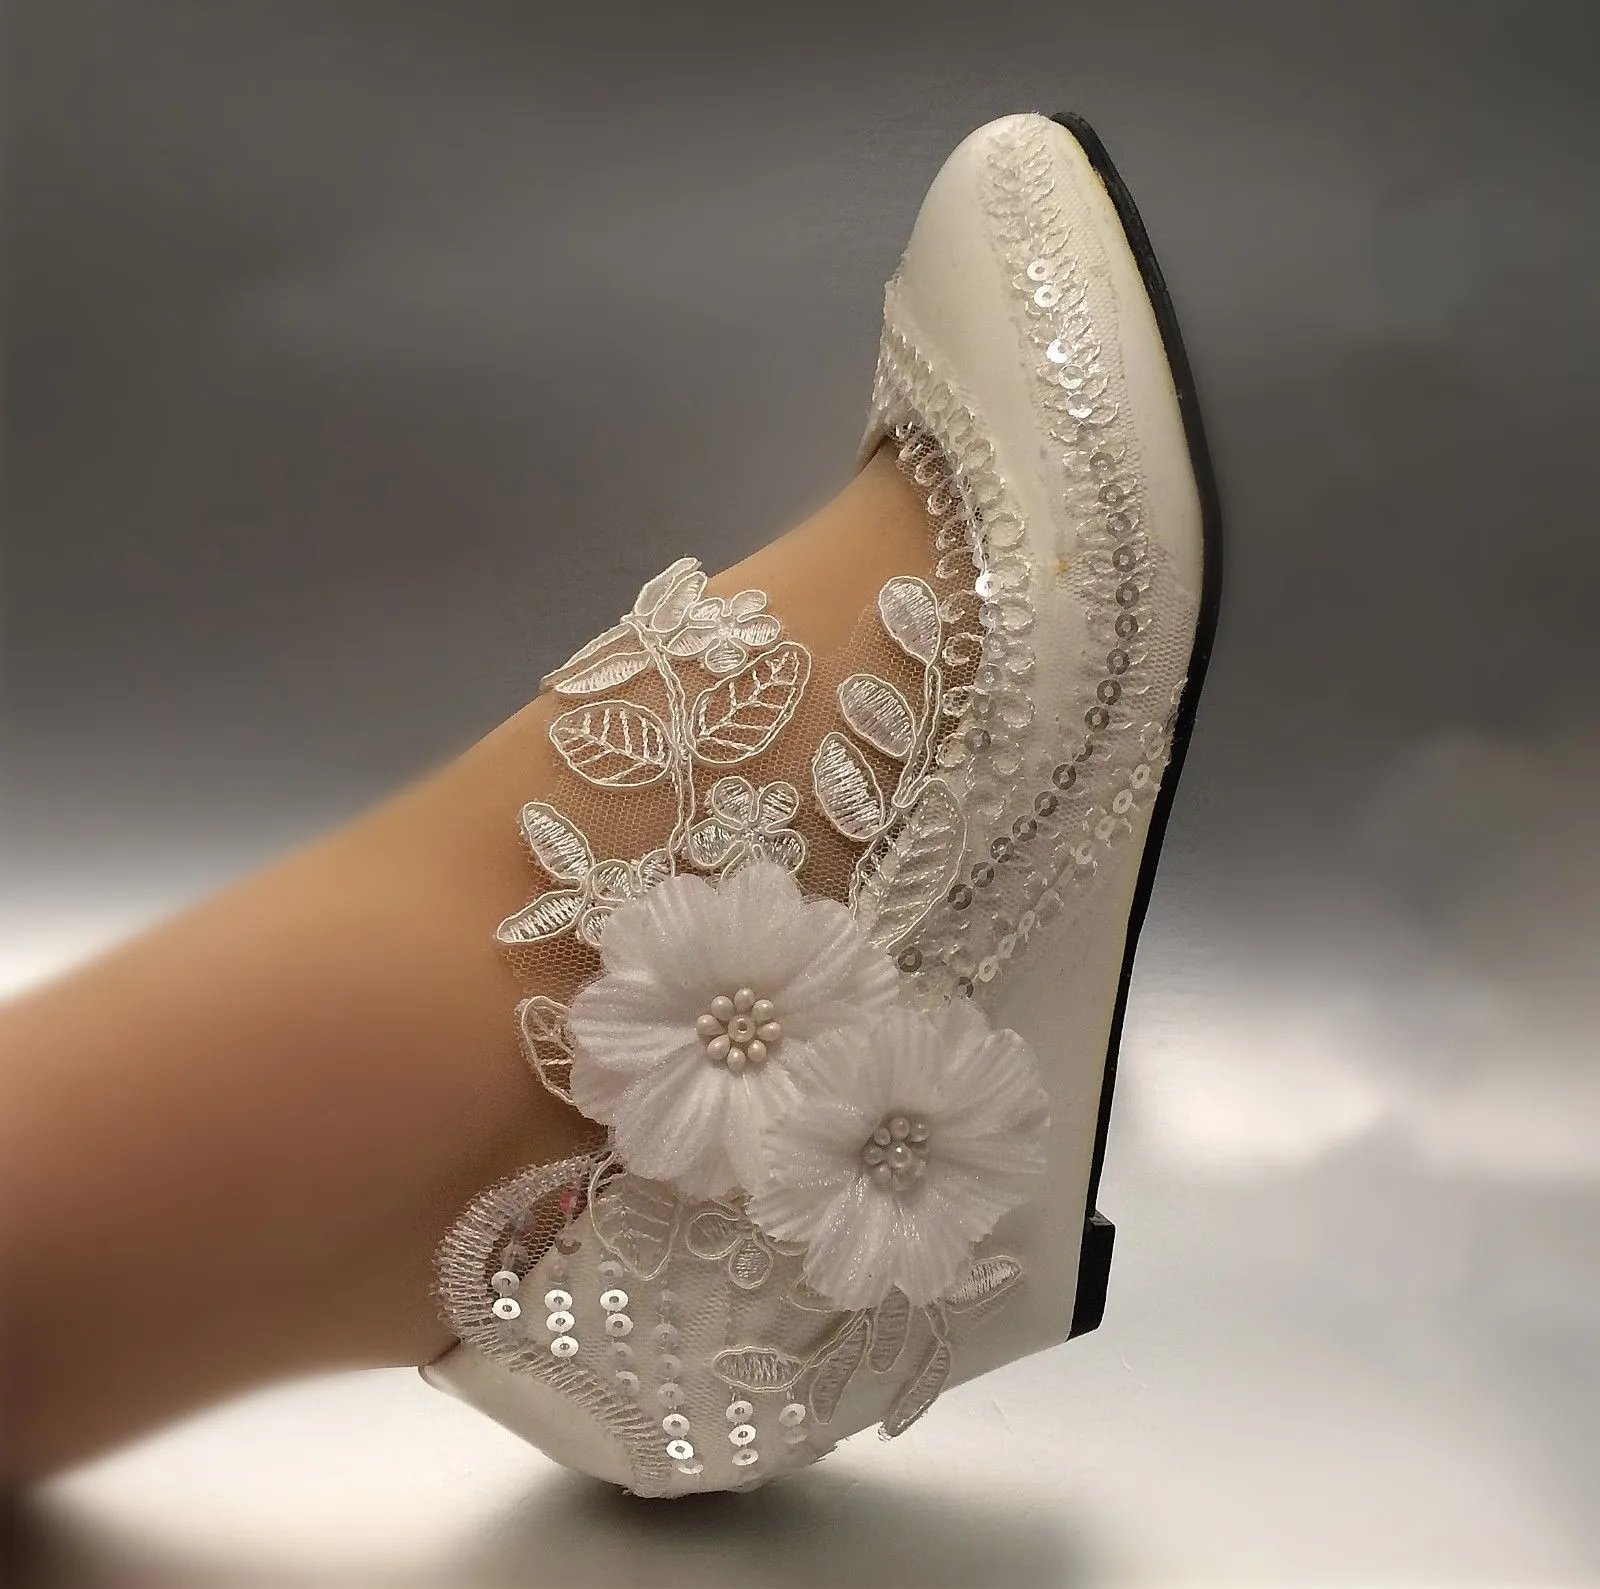 Dress Shoes Women Pumps Shoes Patent Leather Round Toe Bling Wedges Heel lace wedding shoes